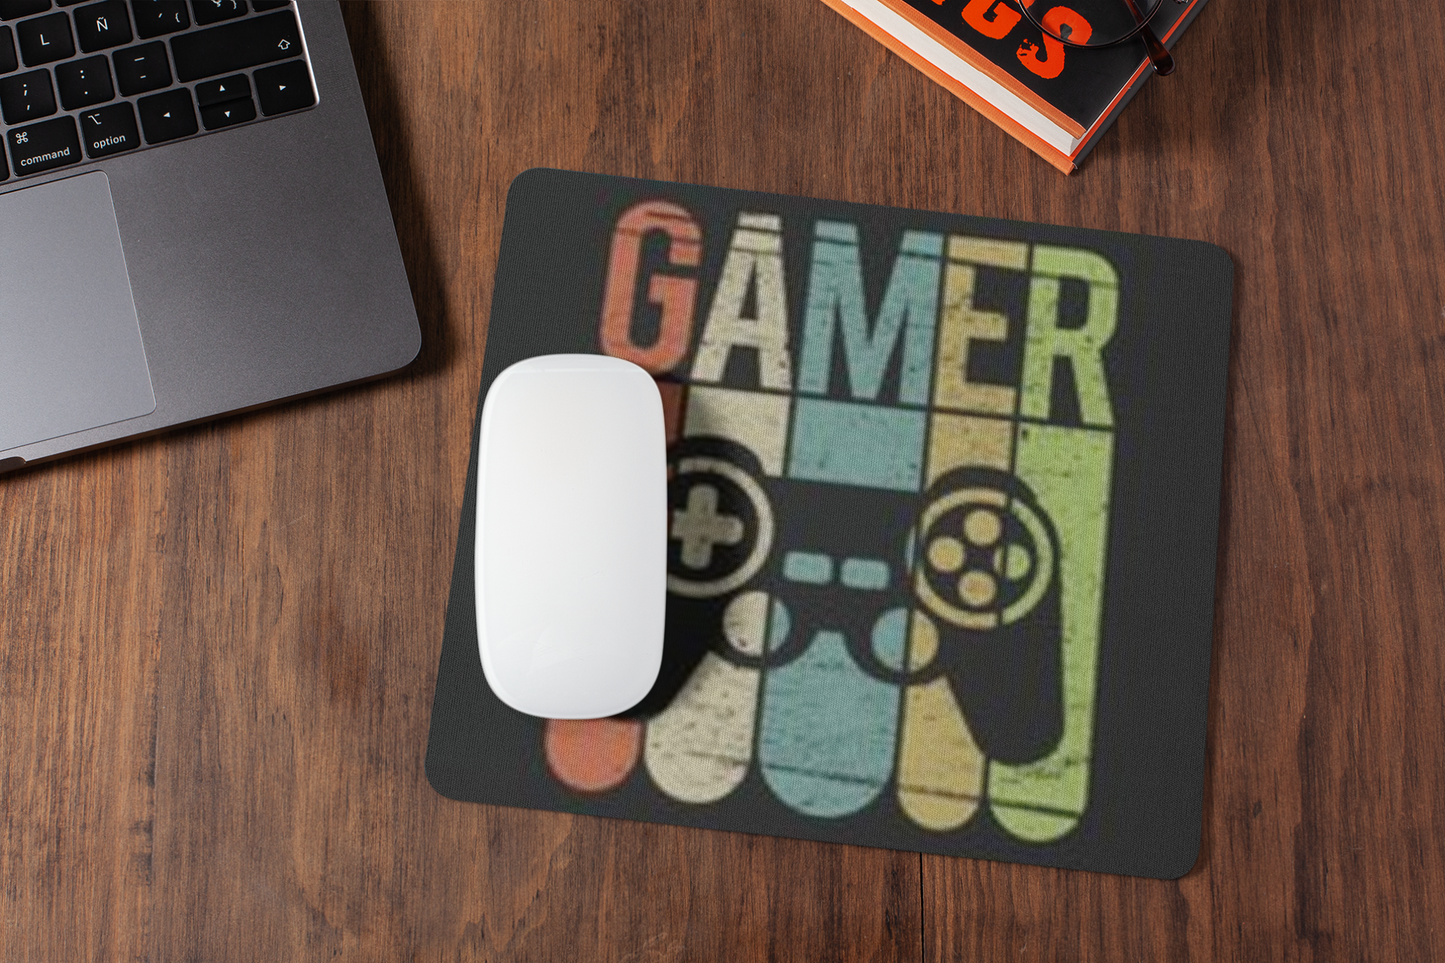 Gamer  mousepad for laptop and desktop with Rubber Base - Anti Skid